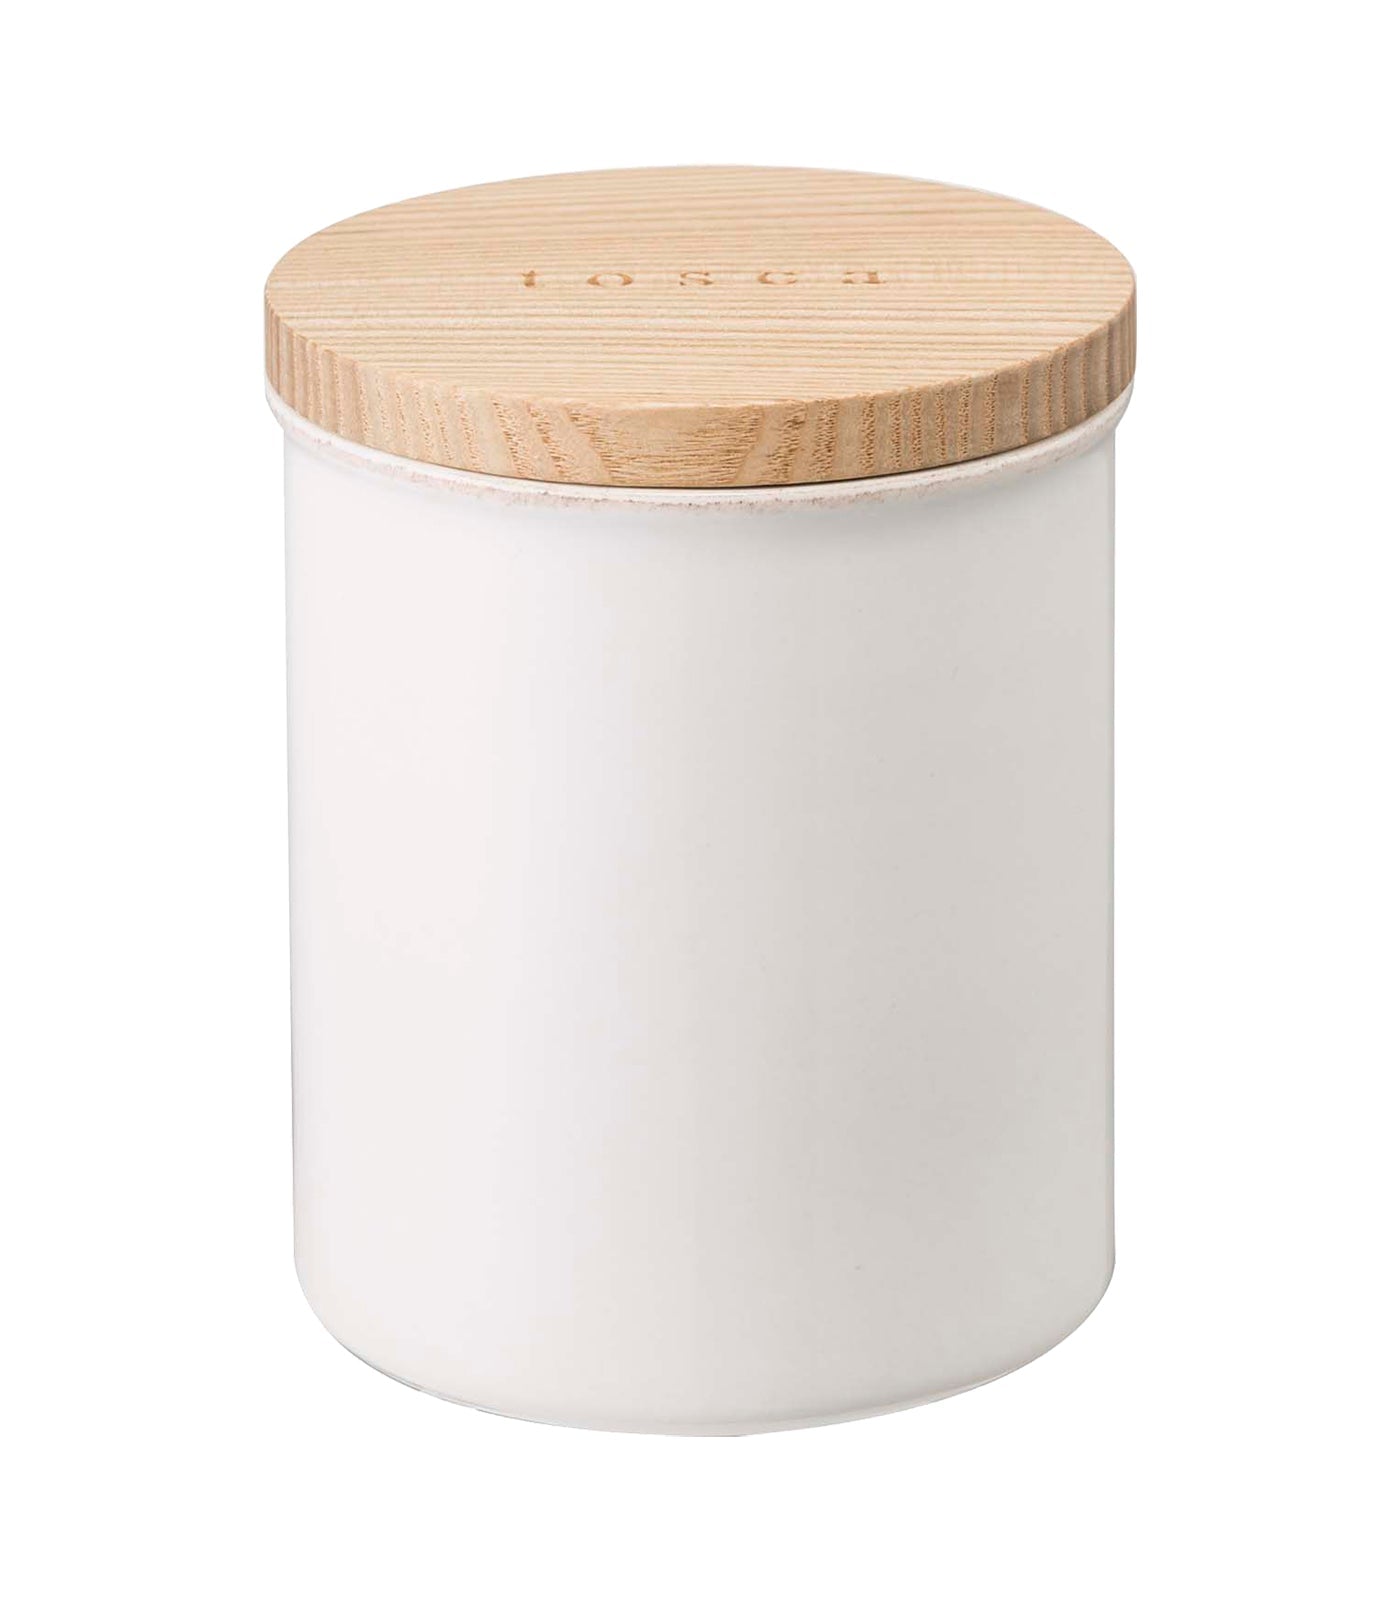 Ceramic-Canister-Four-Styles-Food-Storage